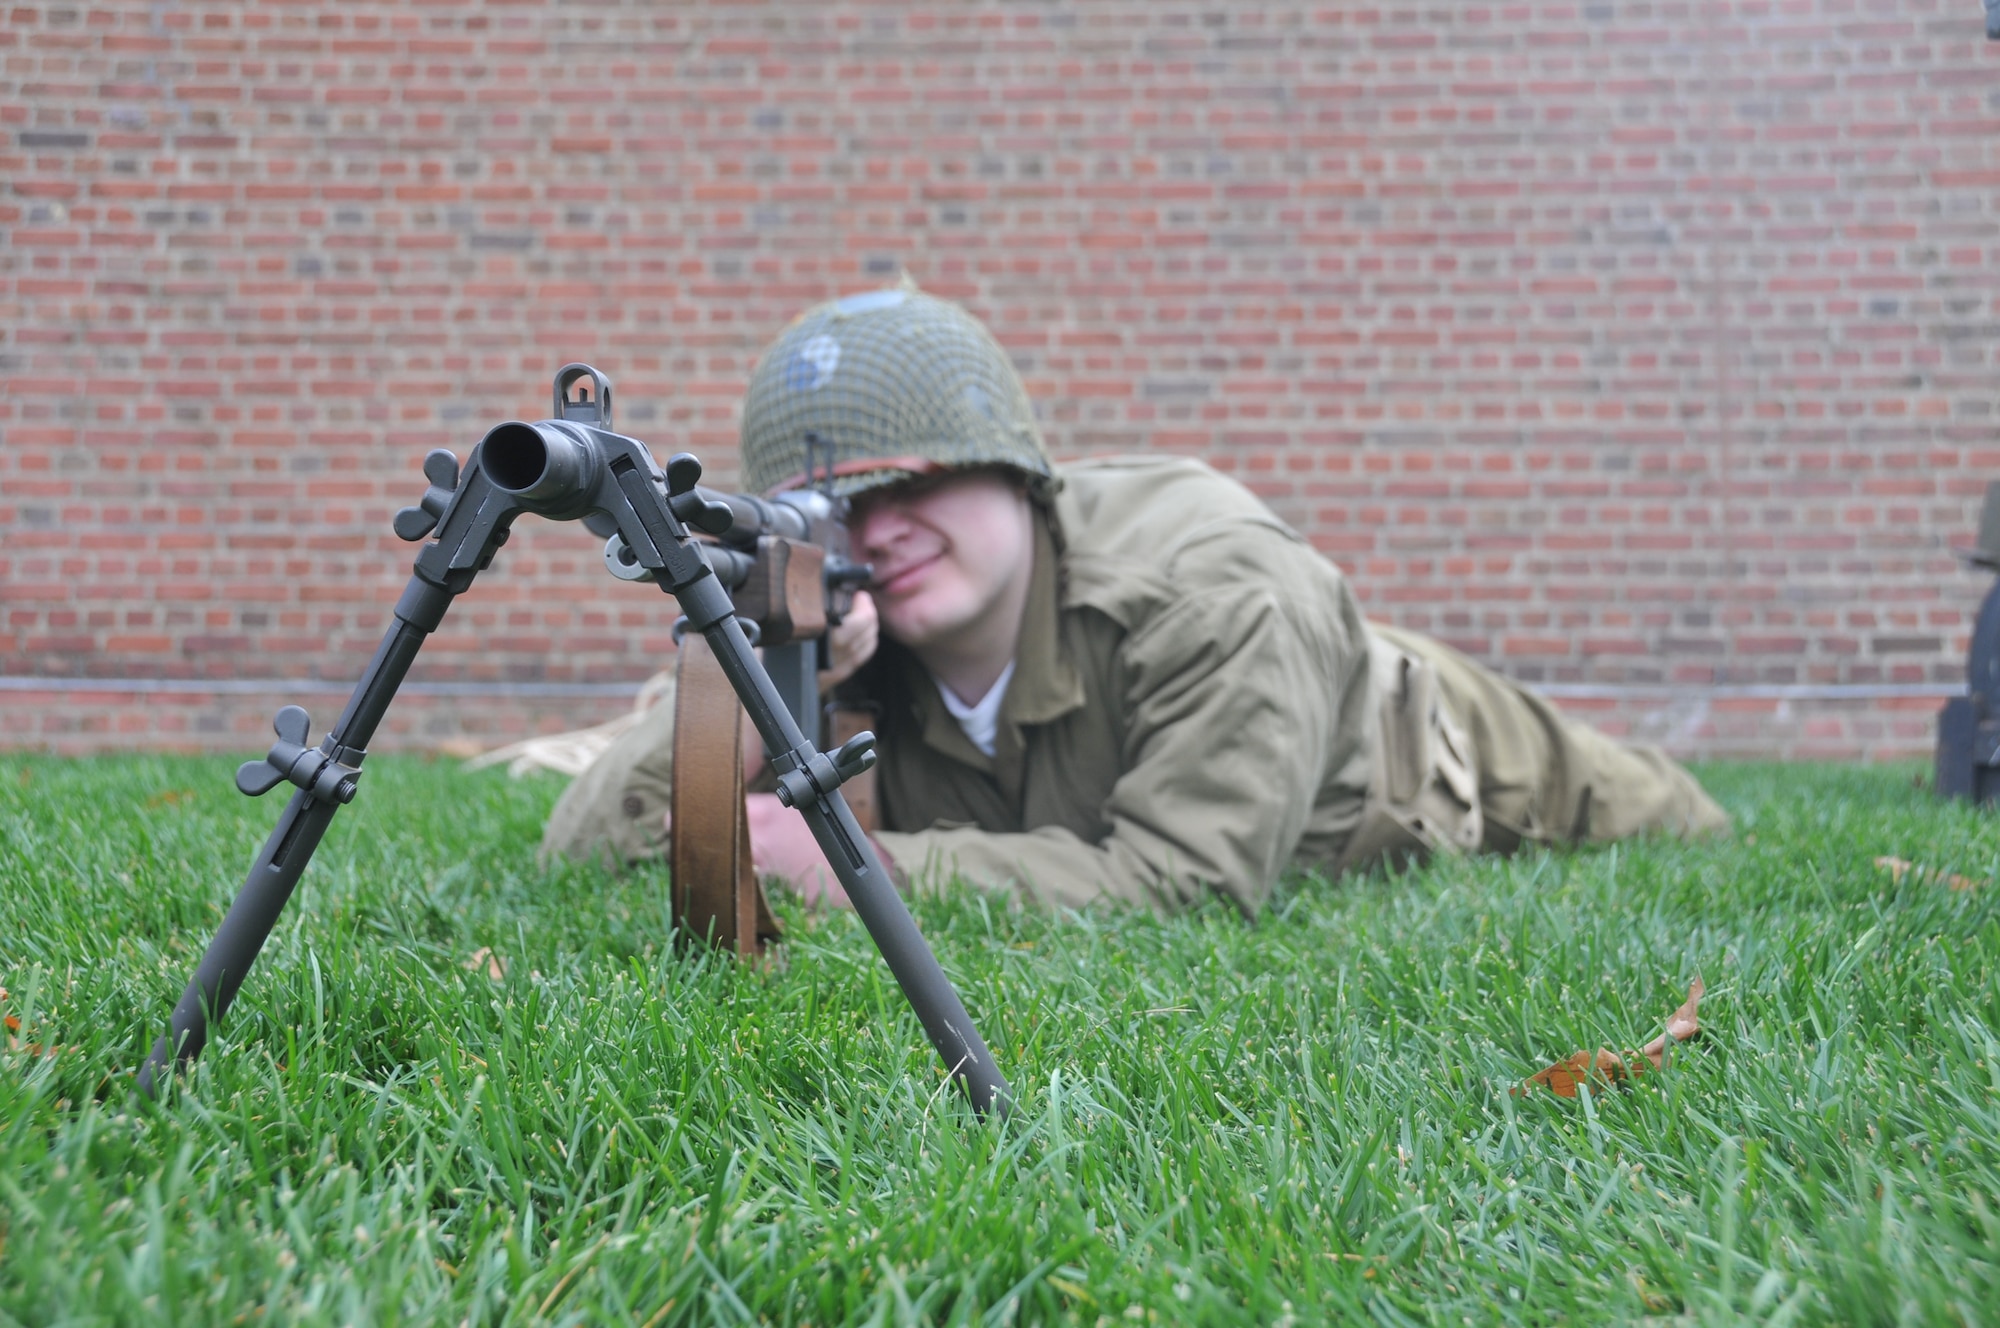 A reenactor from World War II prepares to fire his weapon. The Pennsylvania National Guard joined with the Pennsylvania Department of Conservation of Natural Resources' Point State Park and the Association of the United States Army to organize Steel City Salutes the Troops, Pittsburgh, Nov. 7, 2015. (U.S. Air National Guard Photo by Staff Sgt. Ryan Conley)